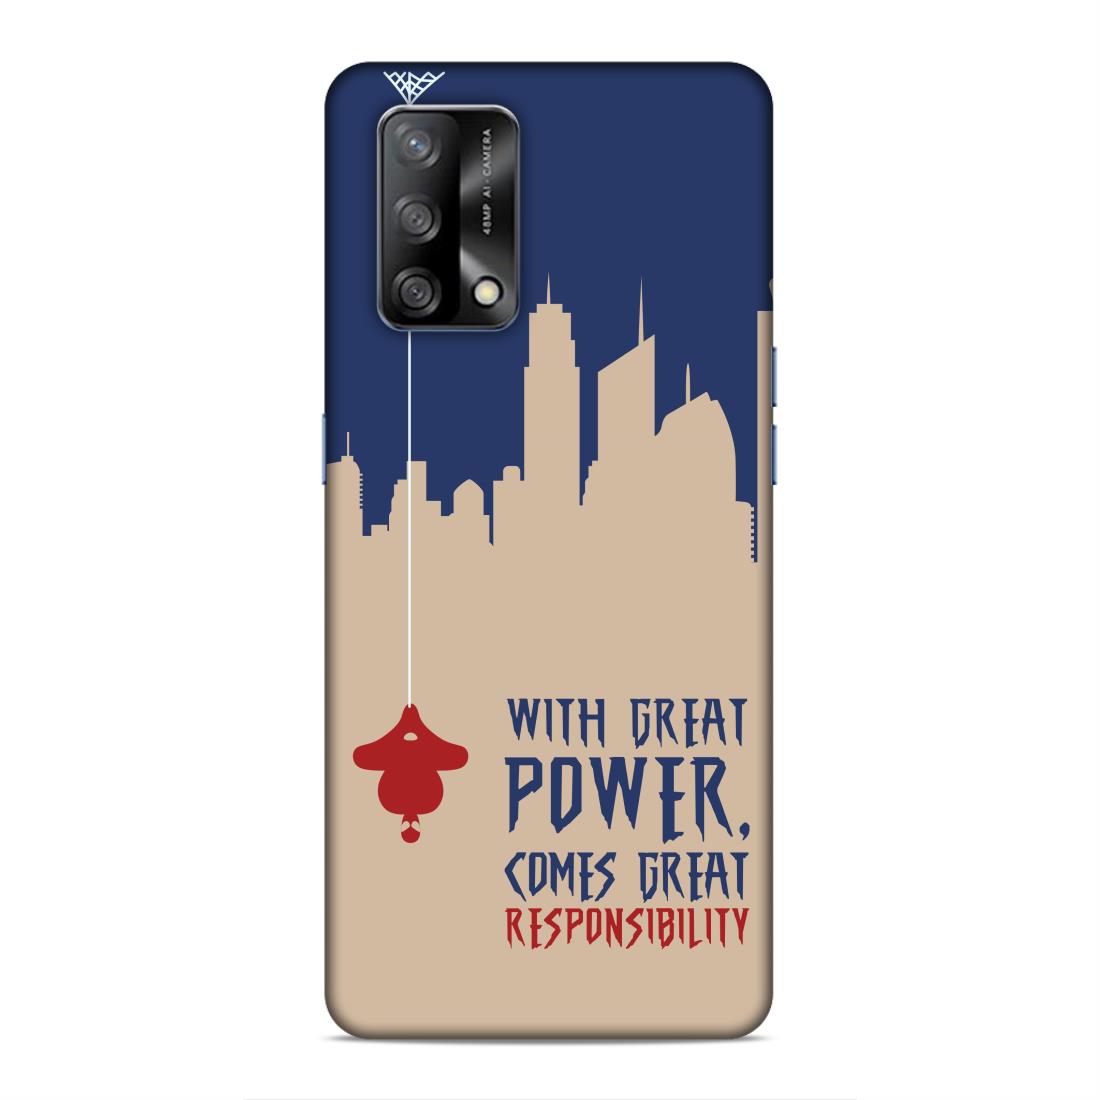 Great Power Comes Great Responsibility Hard Back Case For Oppo F19 / F19s